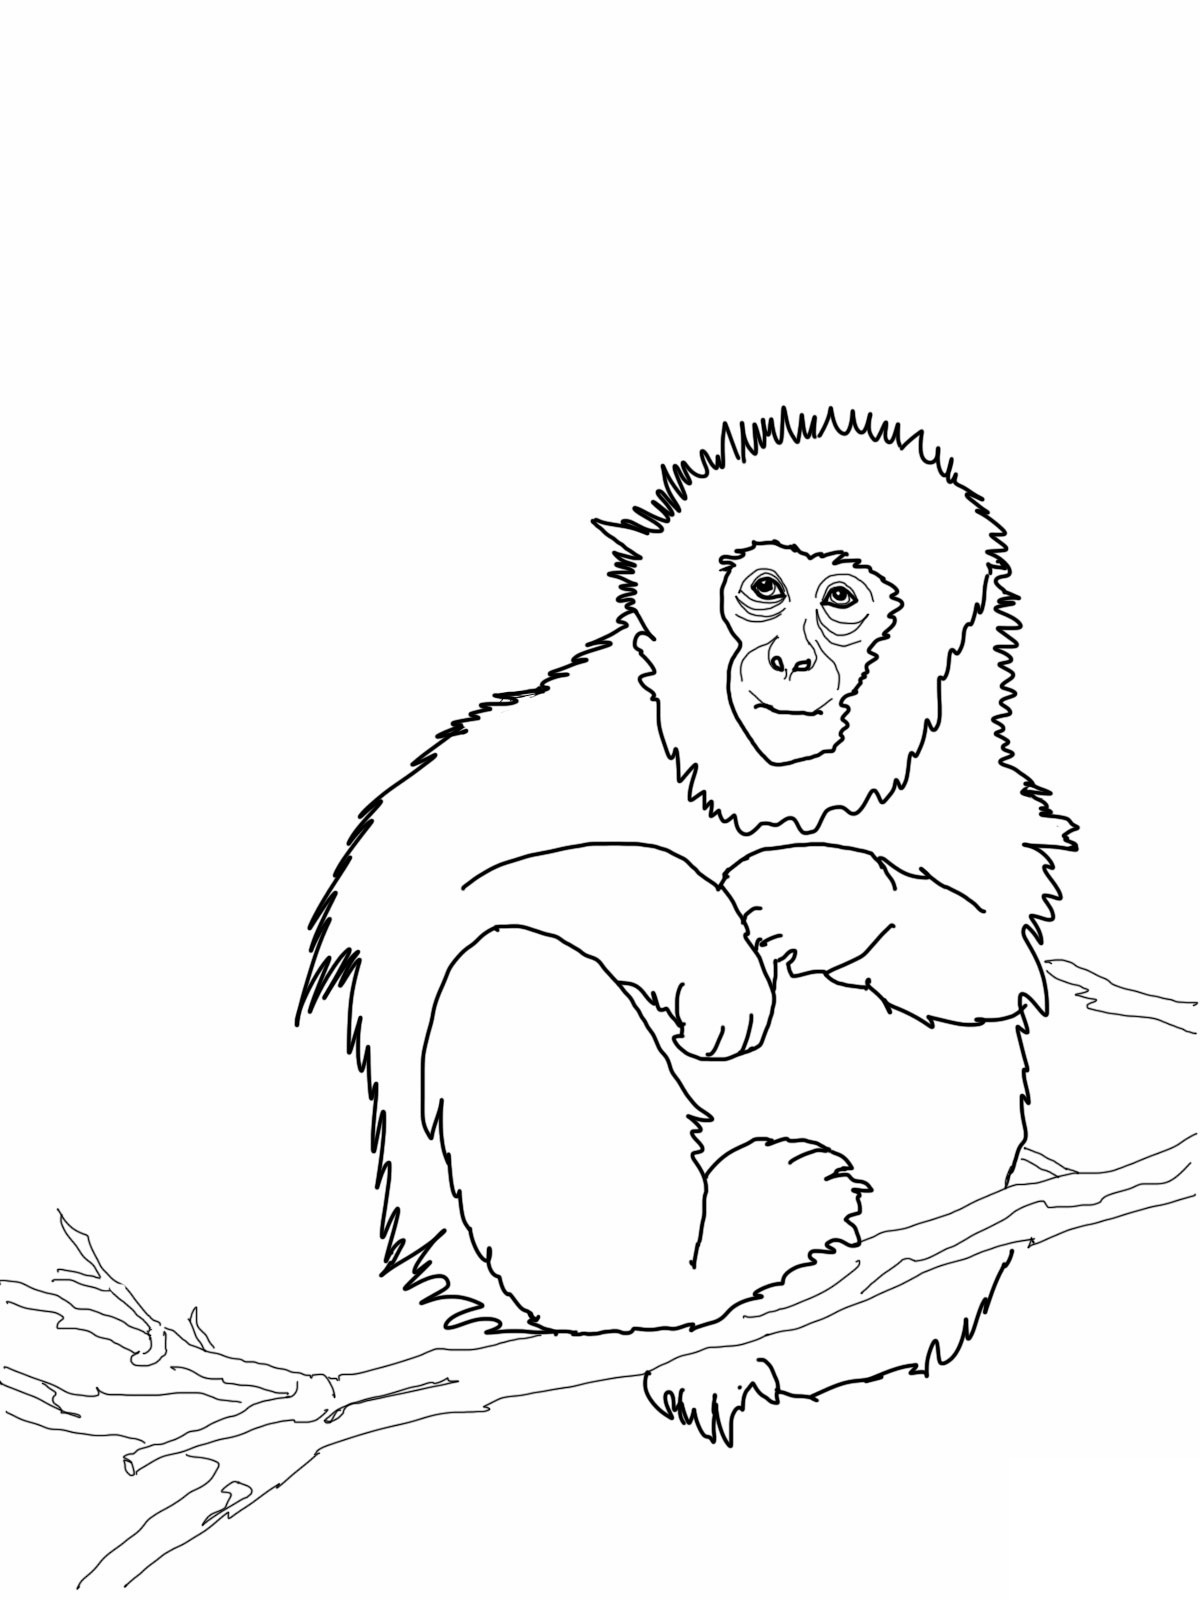  Monkey Coloring Pages | Love coloring pages | #21